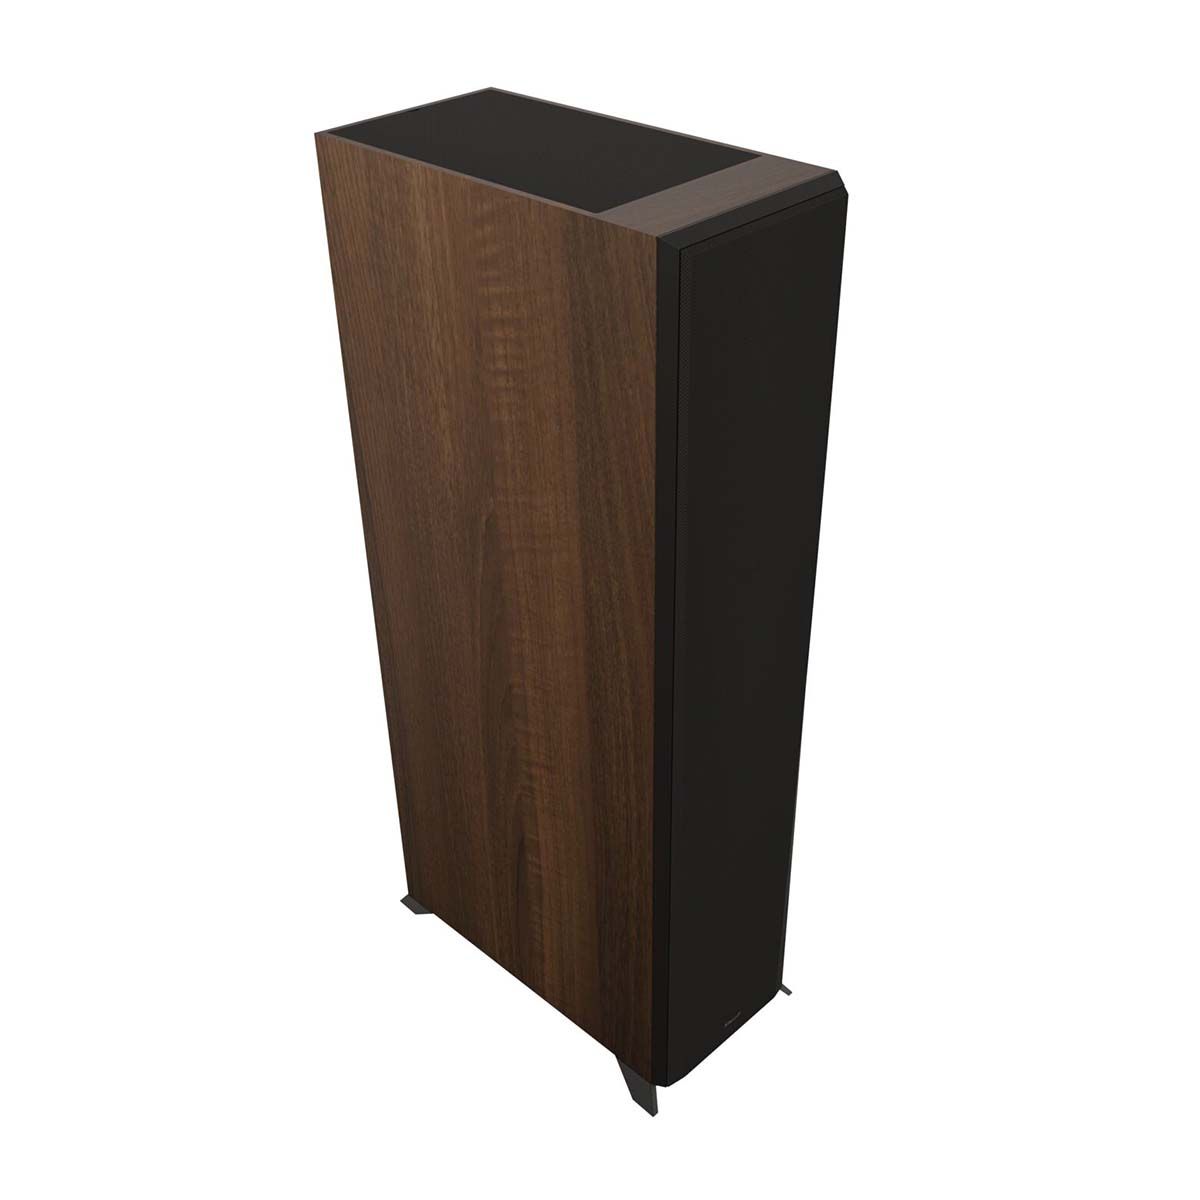 Klipsch RP-8060FA II Dolby Atmos Floorstanding Speaker - Walnut - angled front view with grill